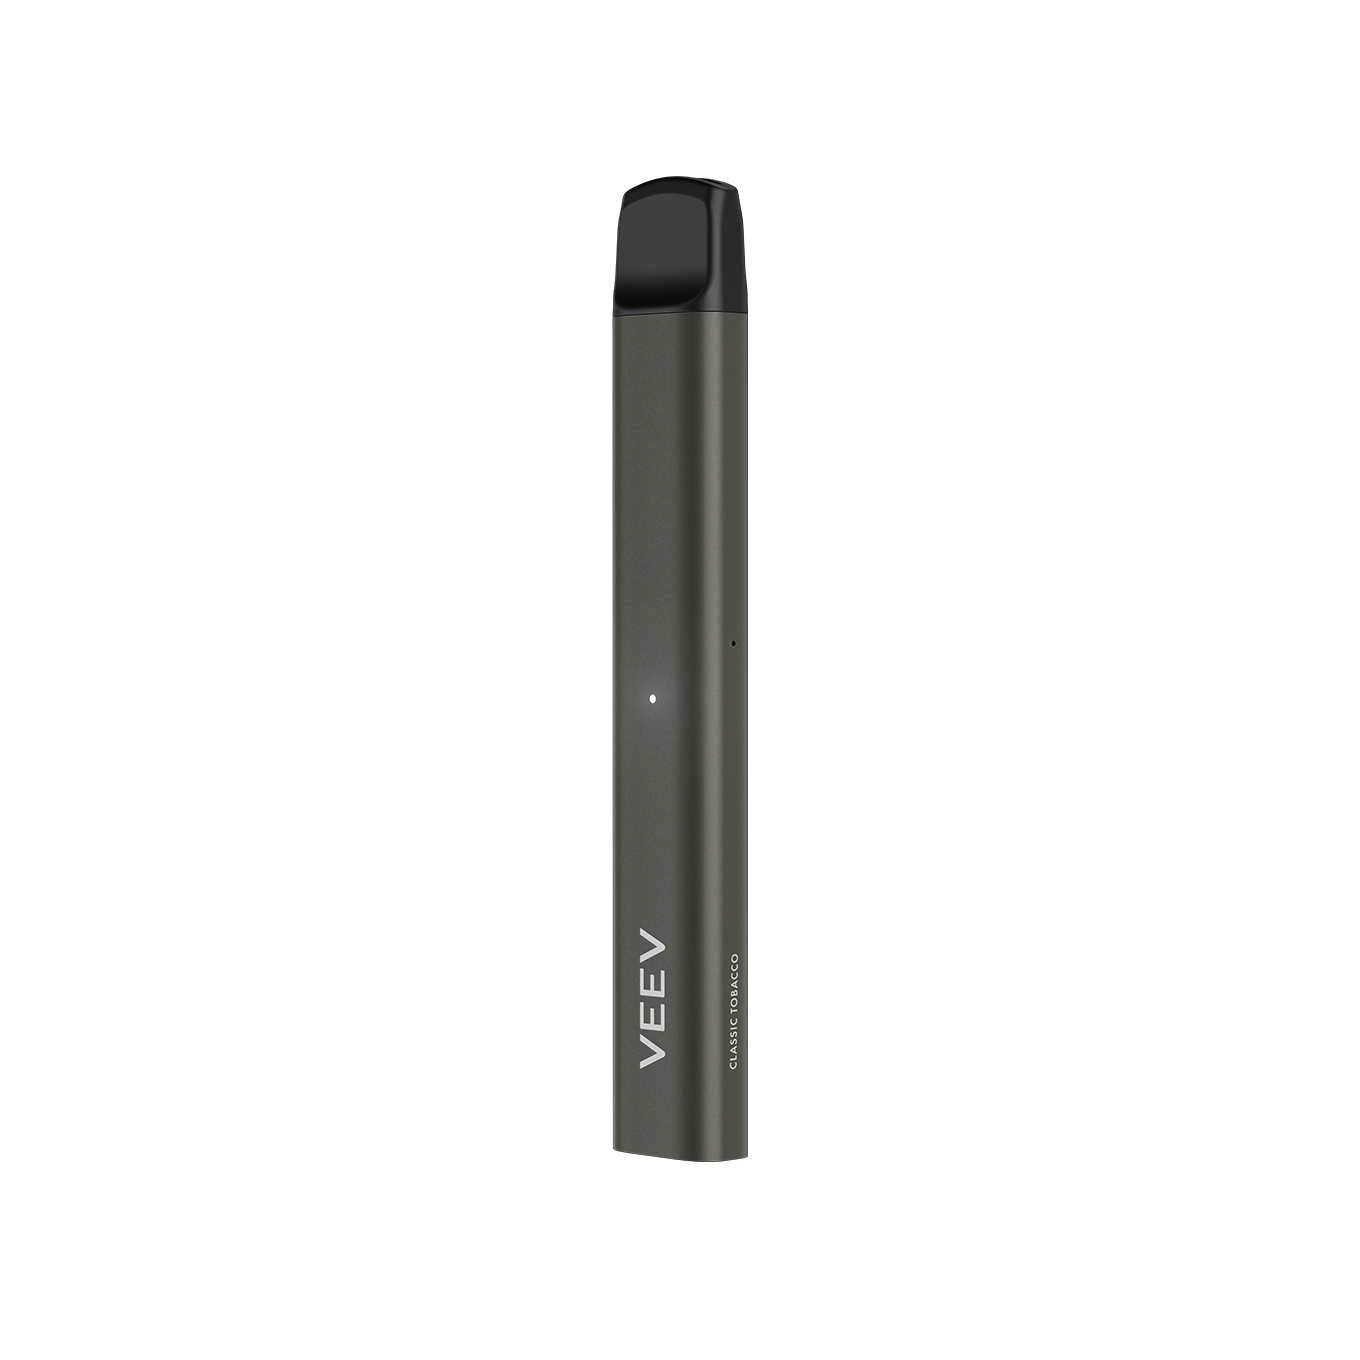 VEEV NOW disposable vape device